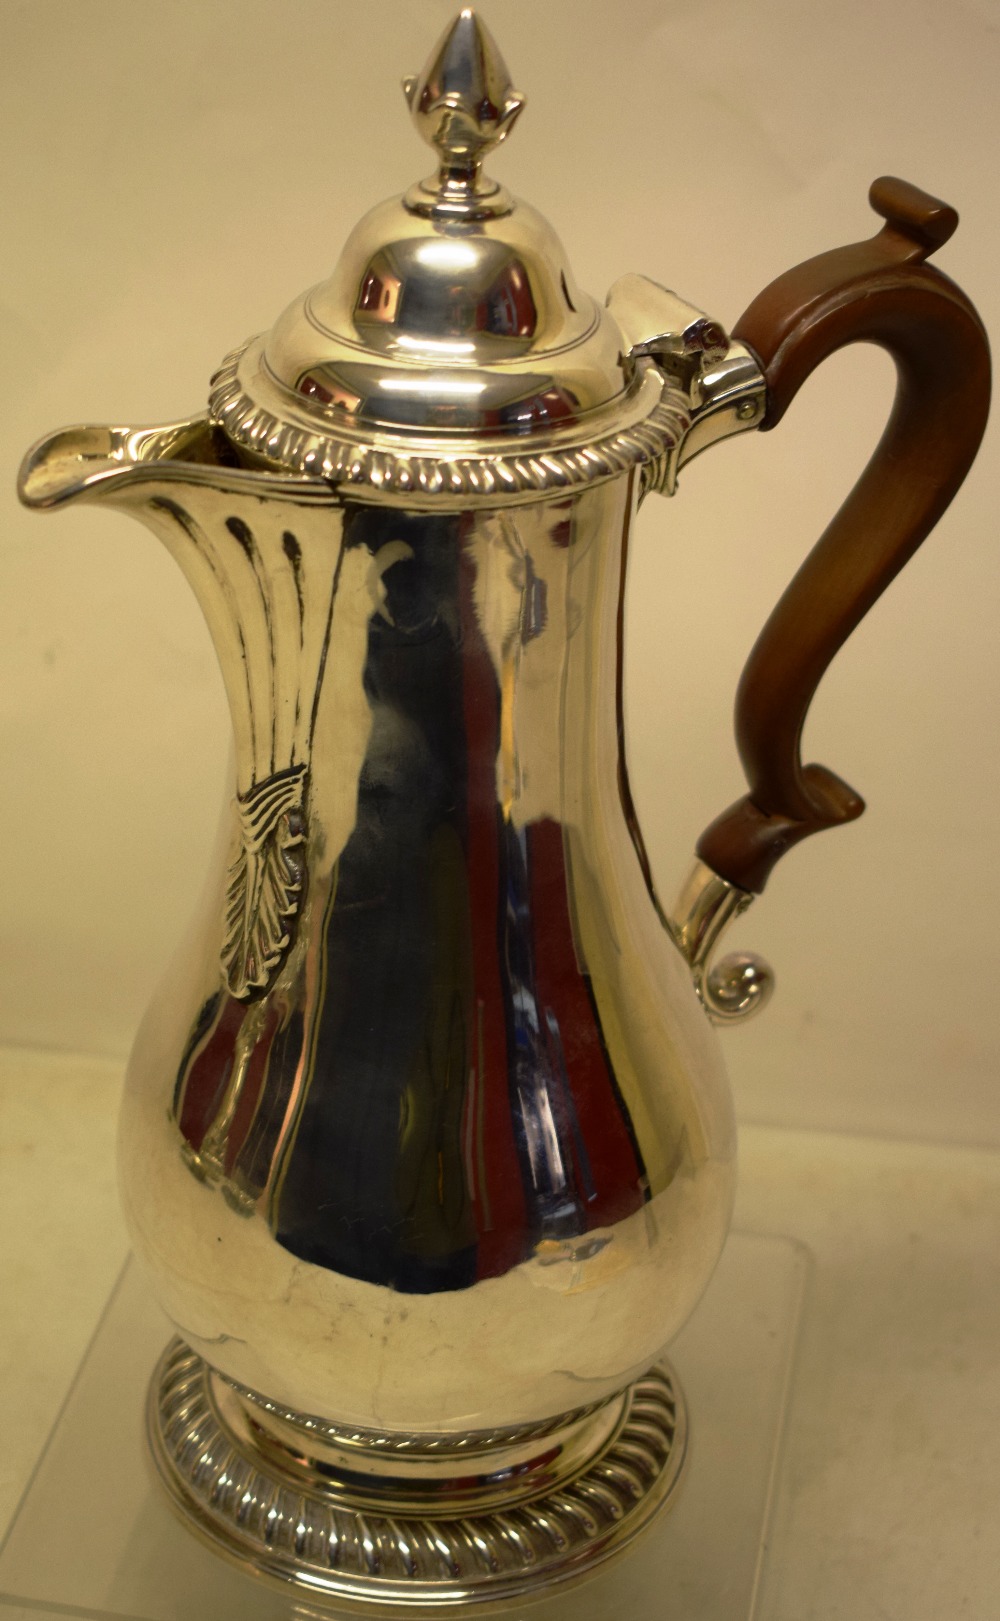 A George III silver baluster jug, having a fluted scroll spout with a leaf pendant, a hinged ogee